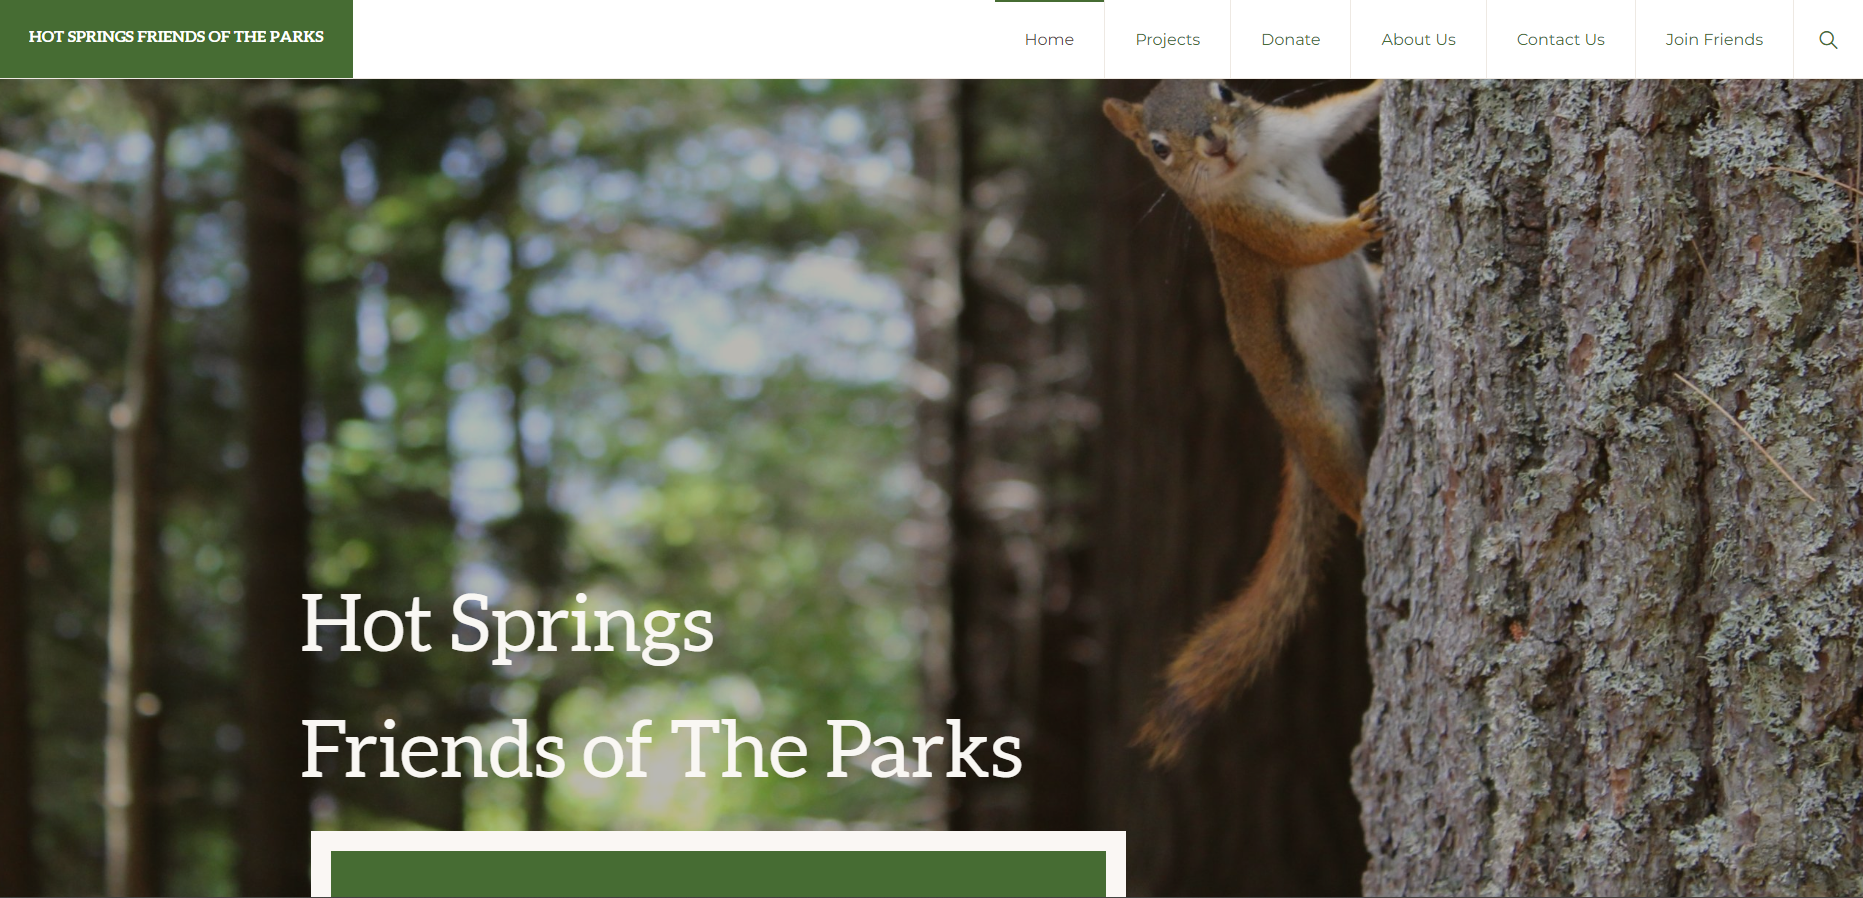 Hot Springs Friends of the Parks Website Home Page